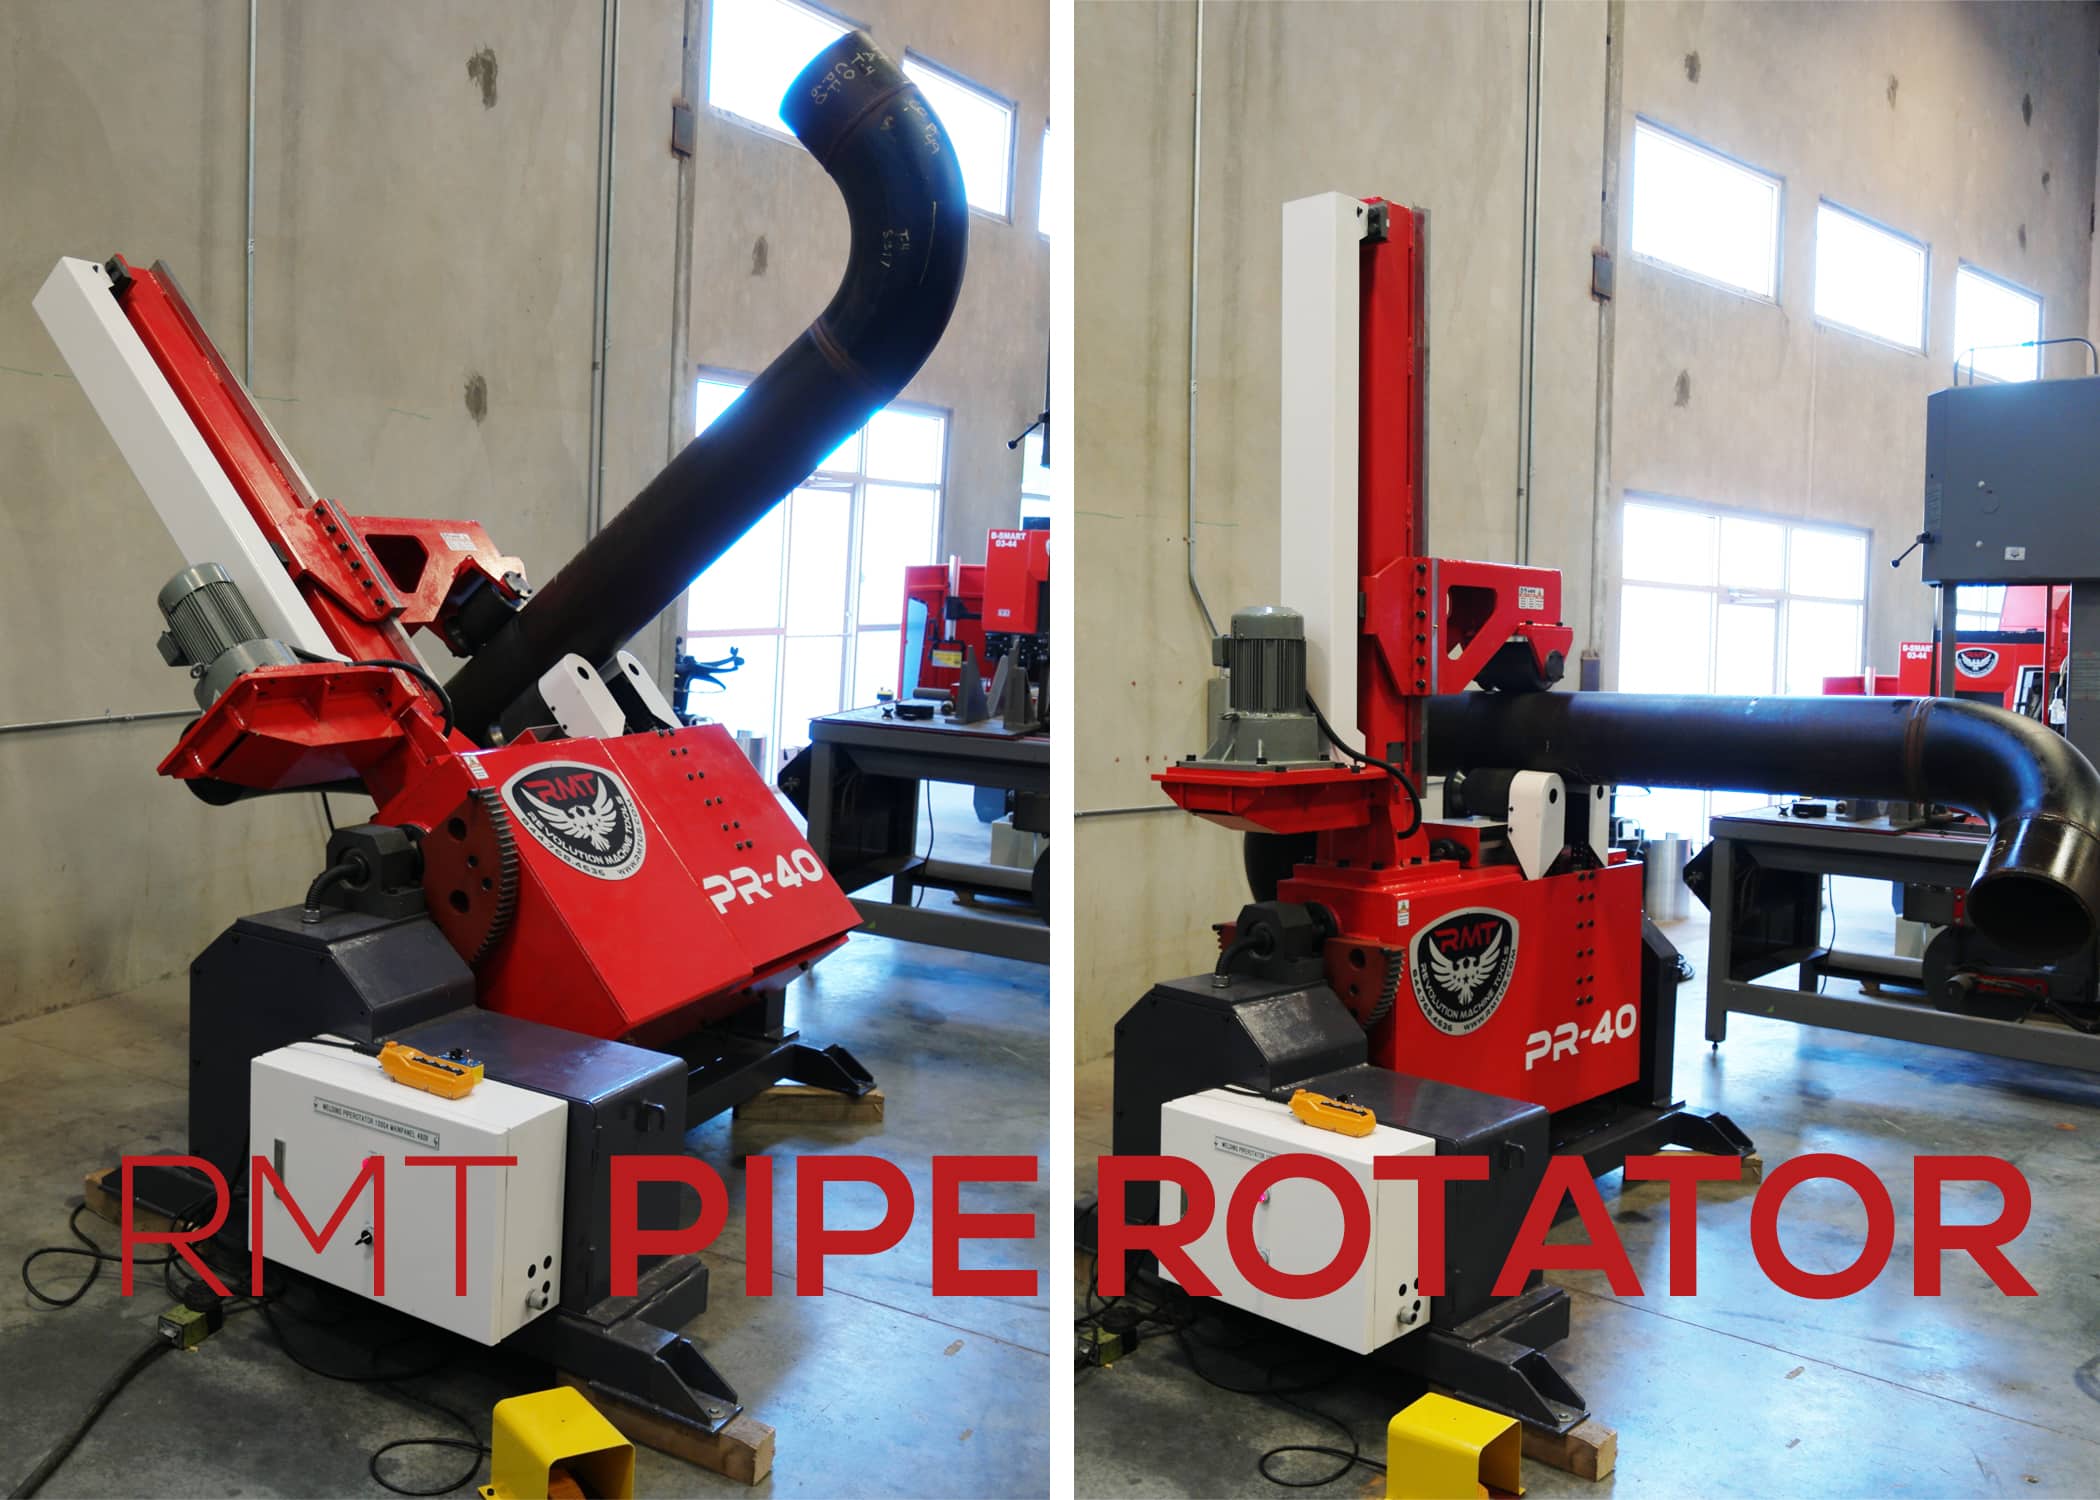 Pipe Rotator Featured